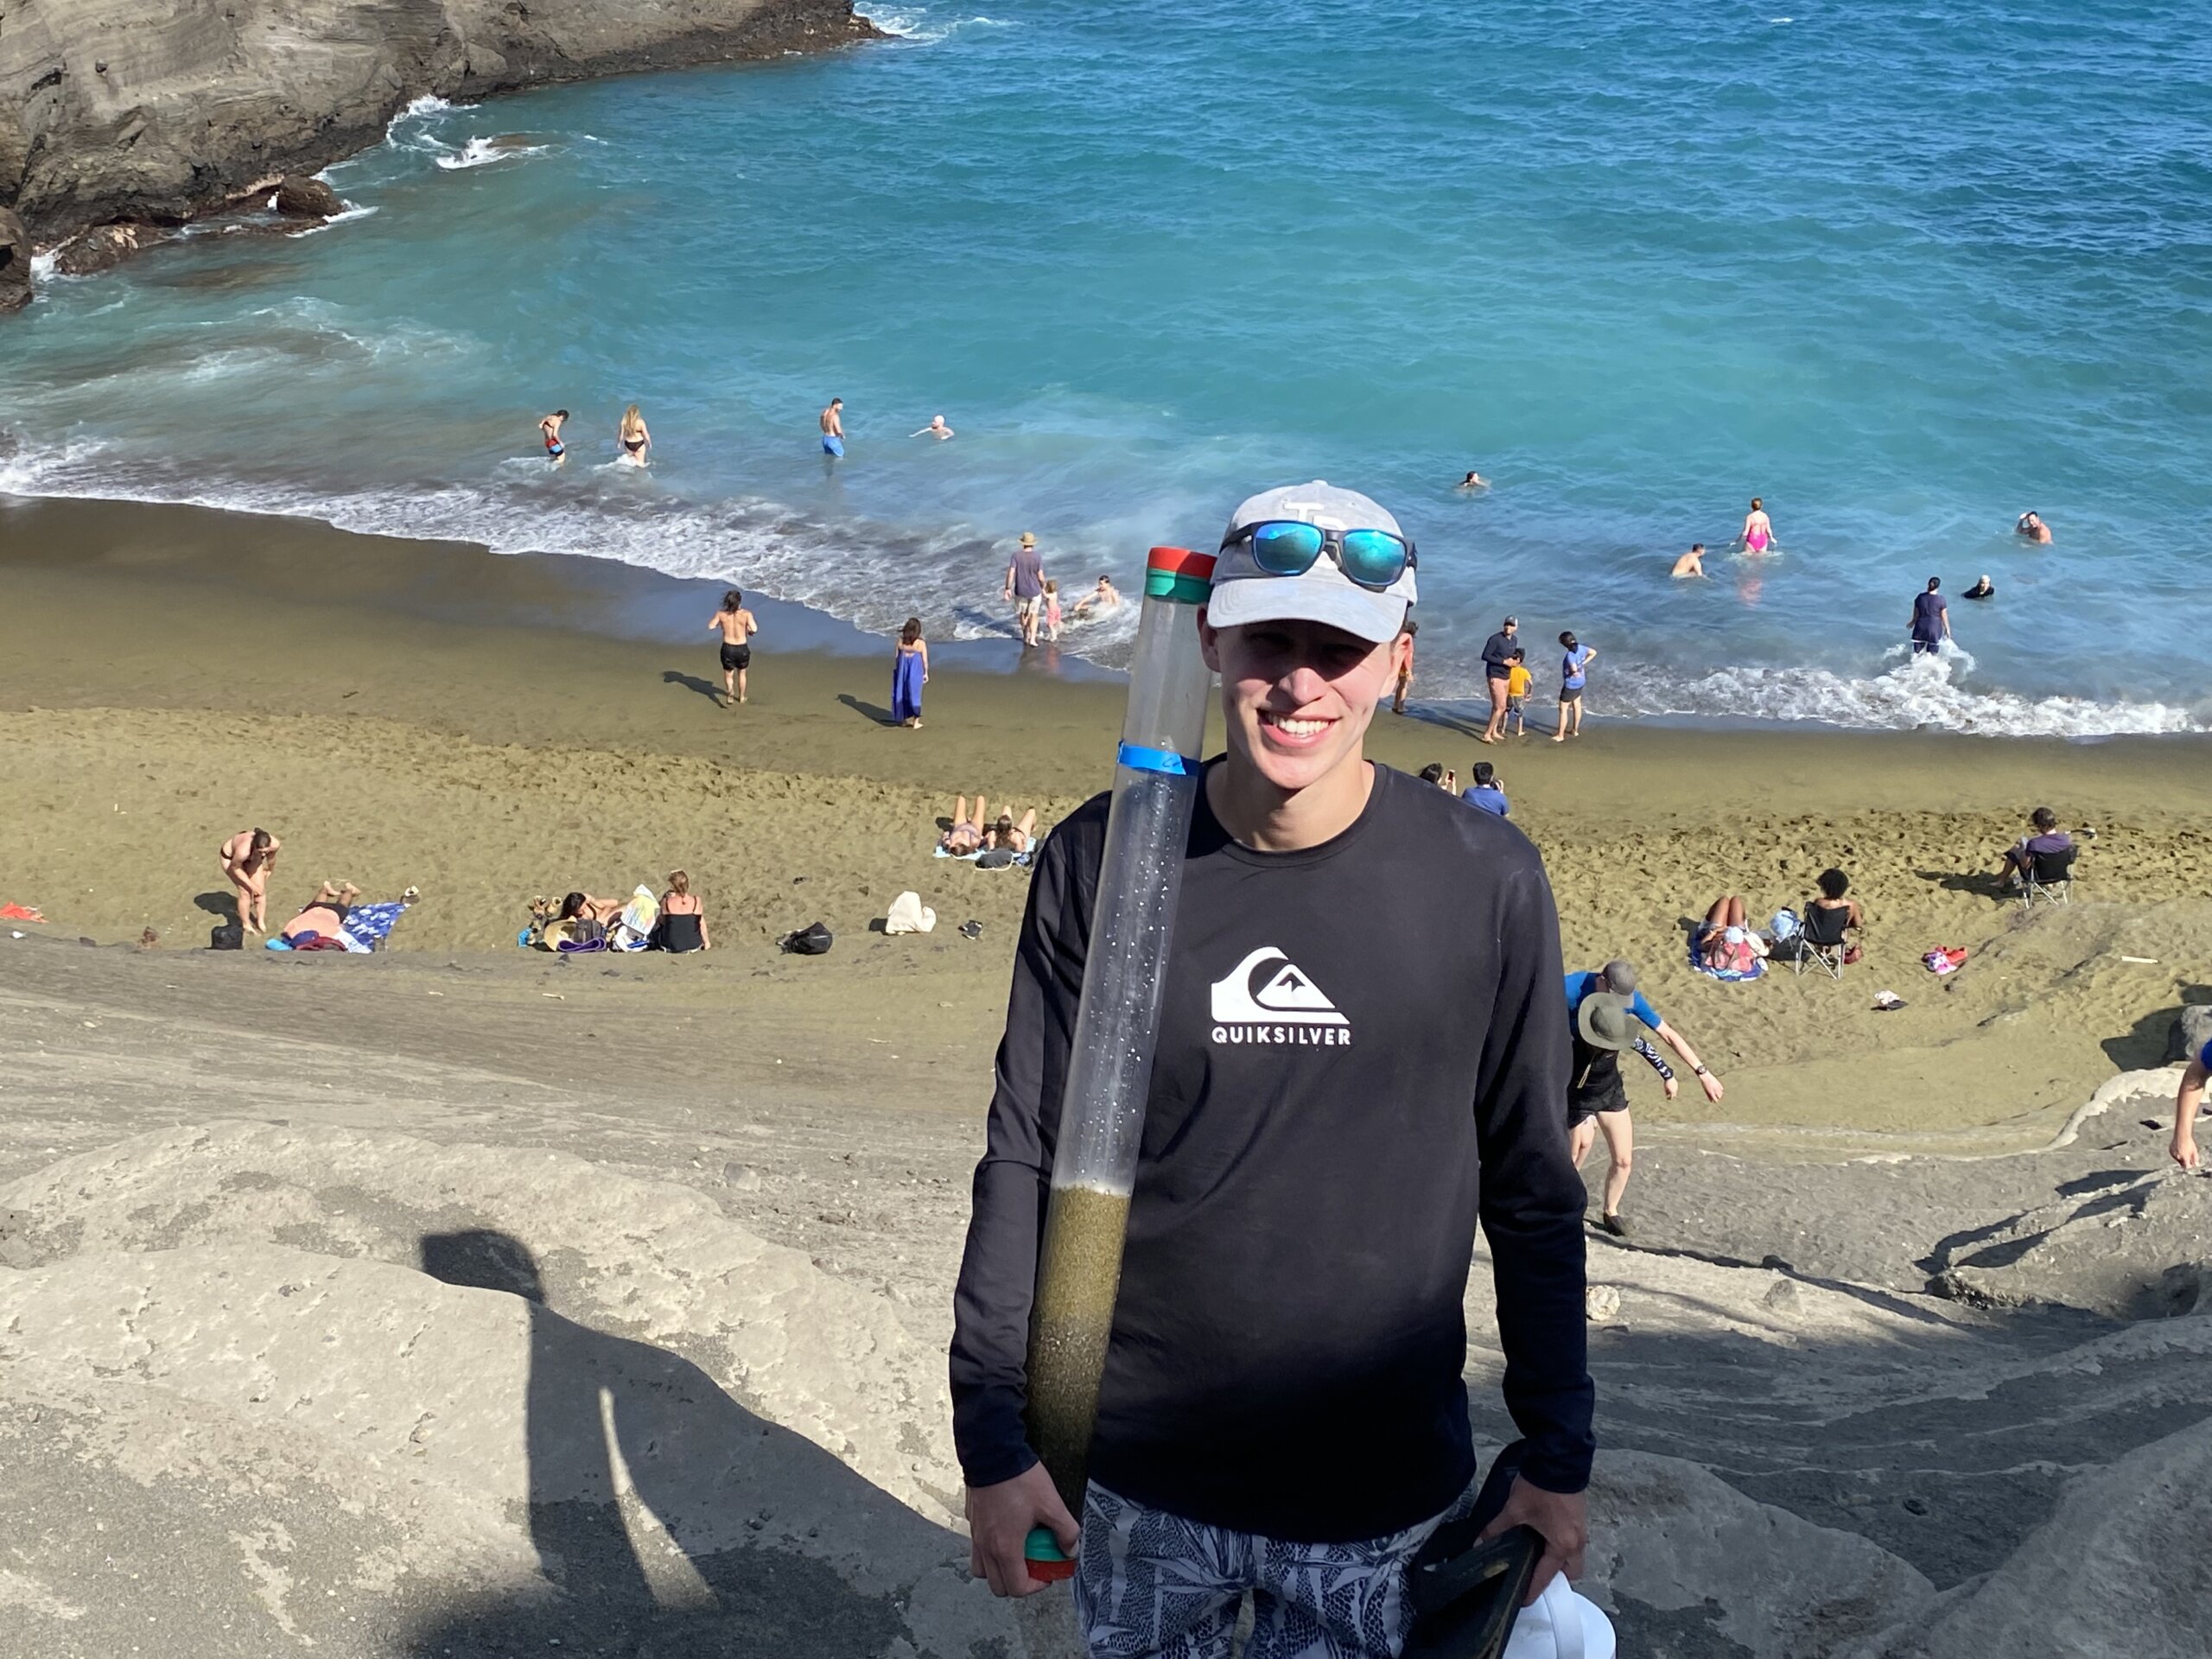 Cal Poly student has a sample of green sand during a research trip to Hawaii